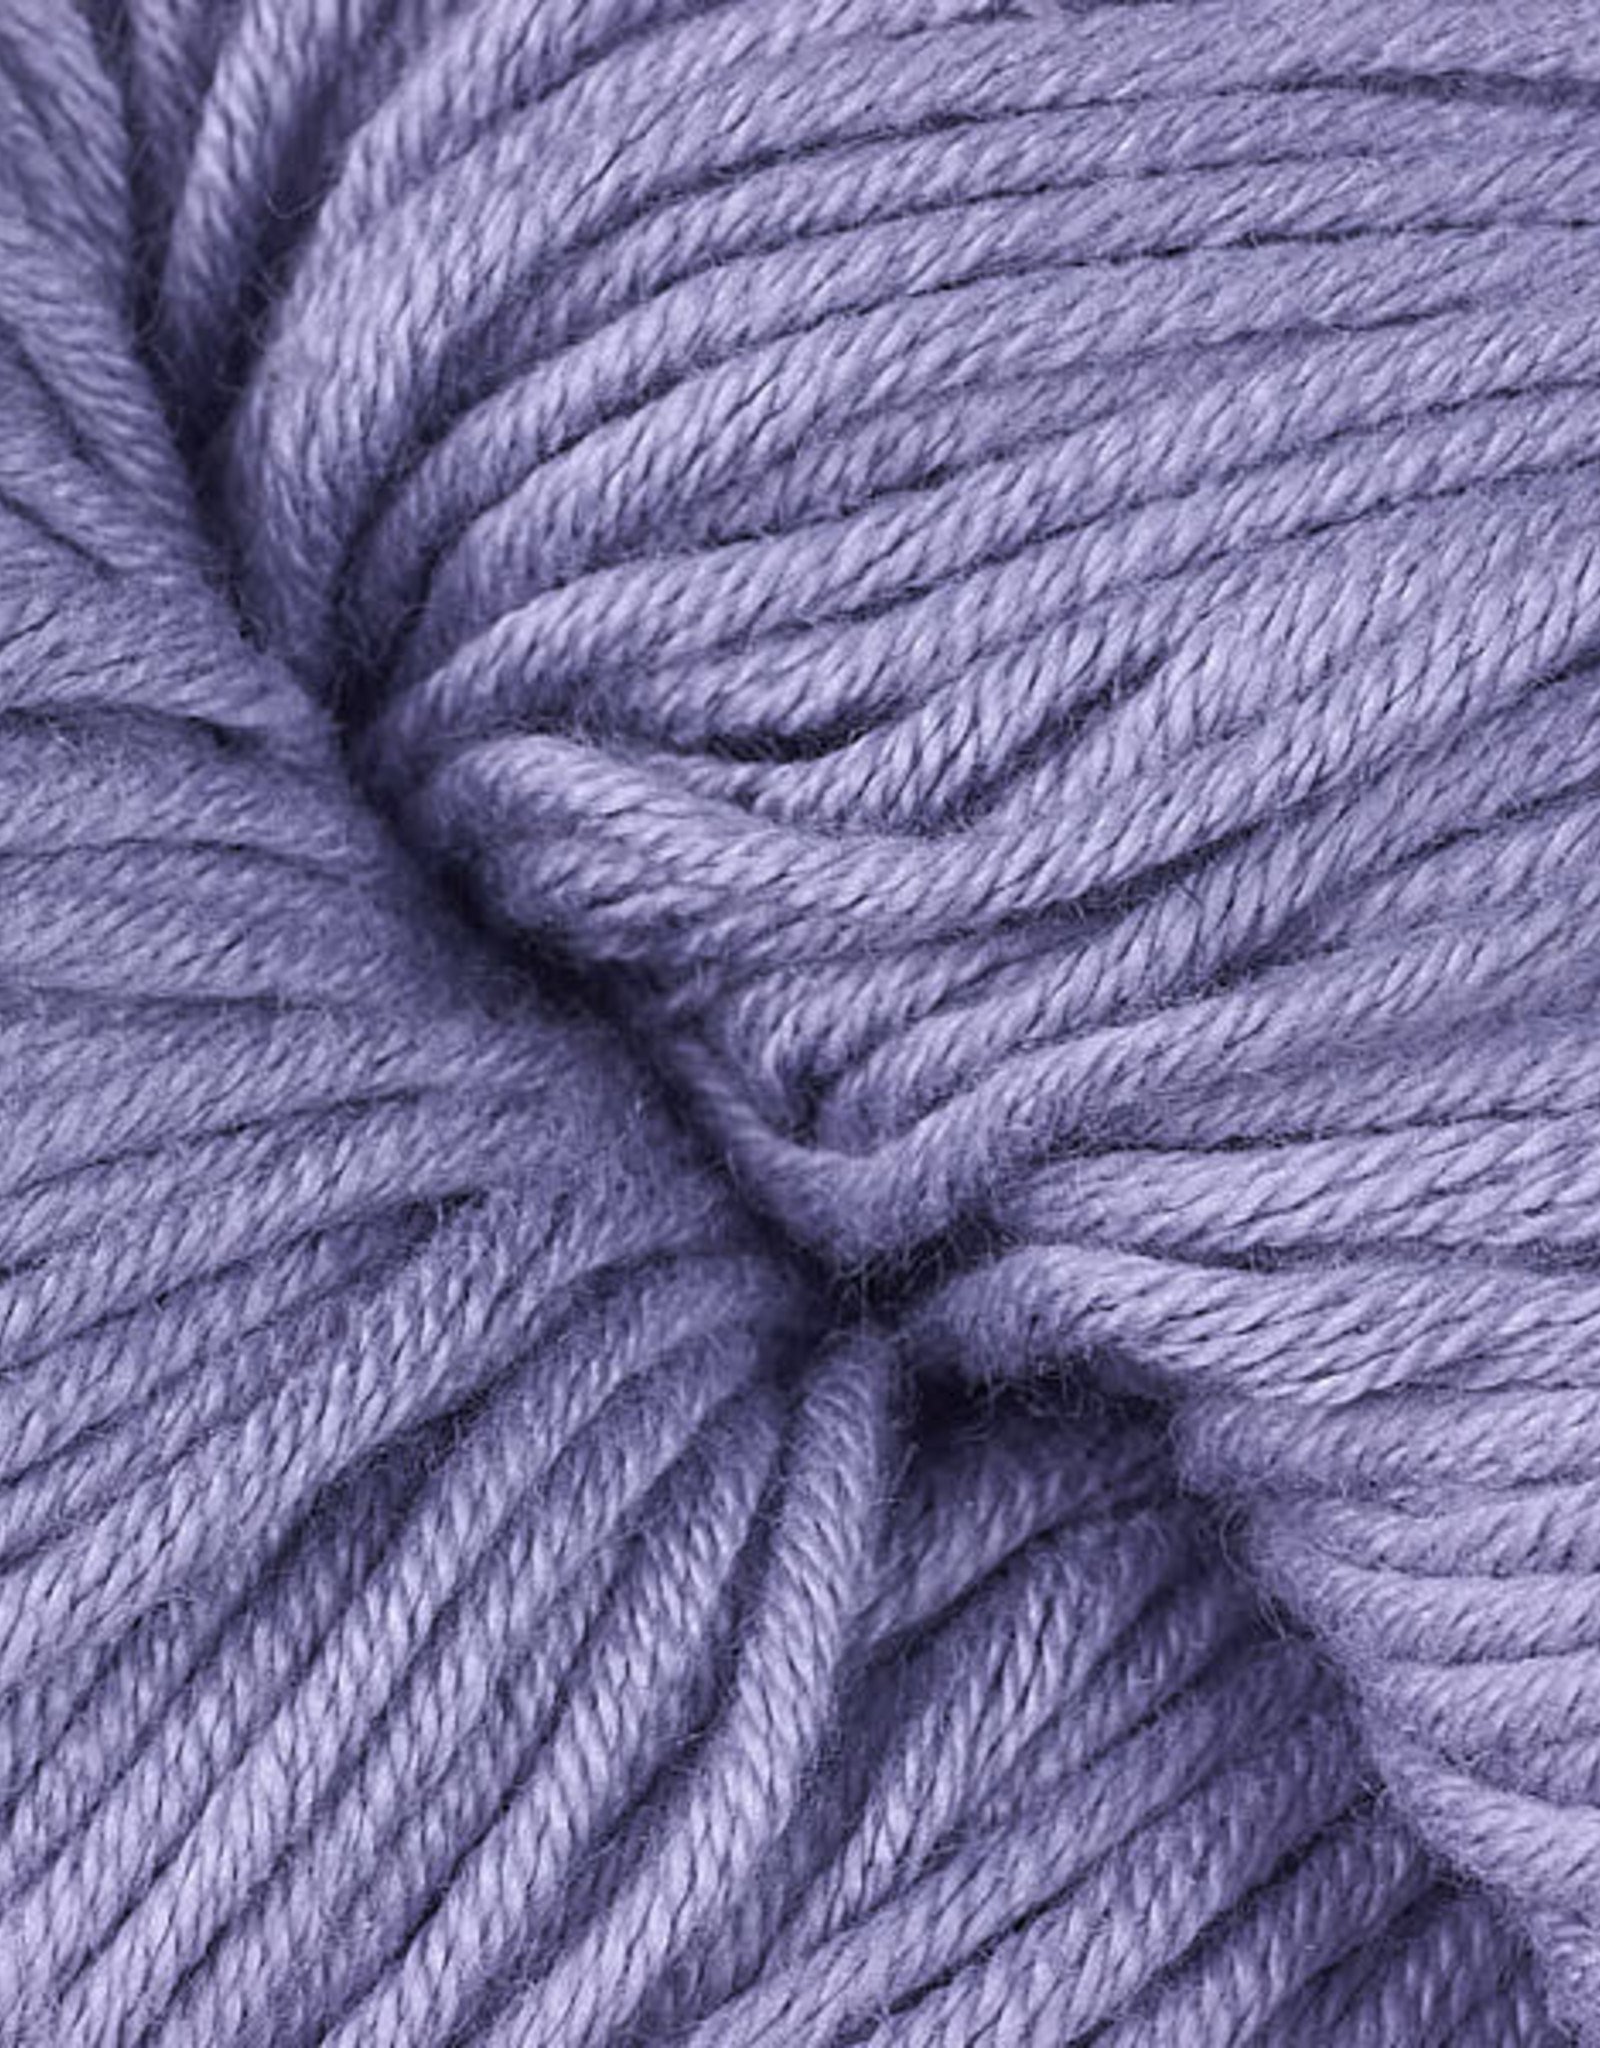 Berroco Modern Cotton  Worsted by Berroco Color Group 2